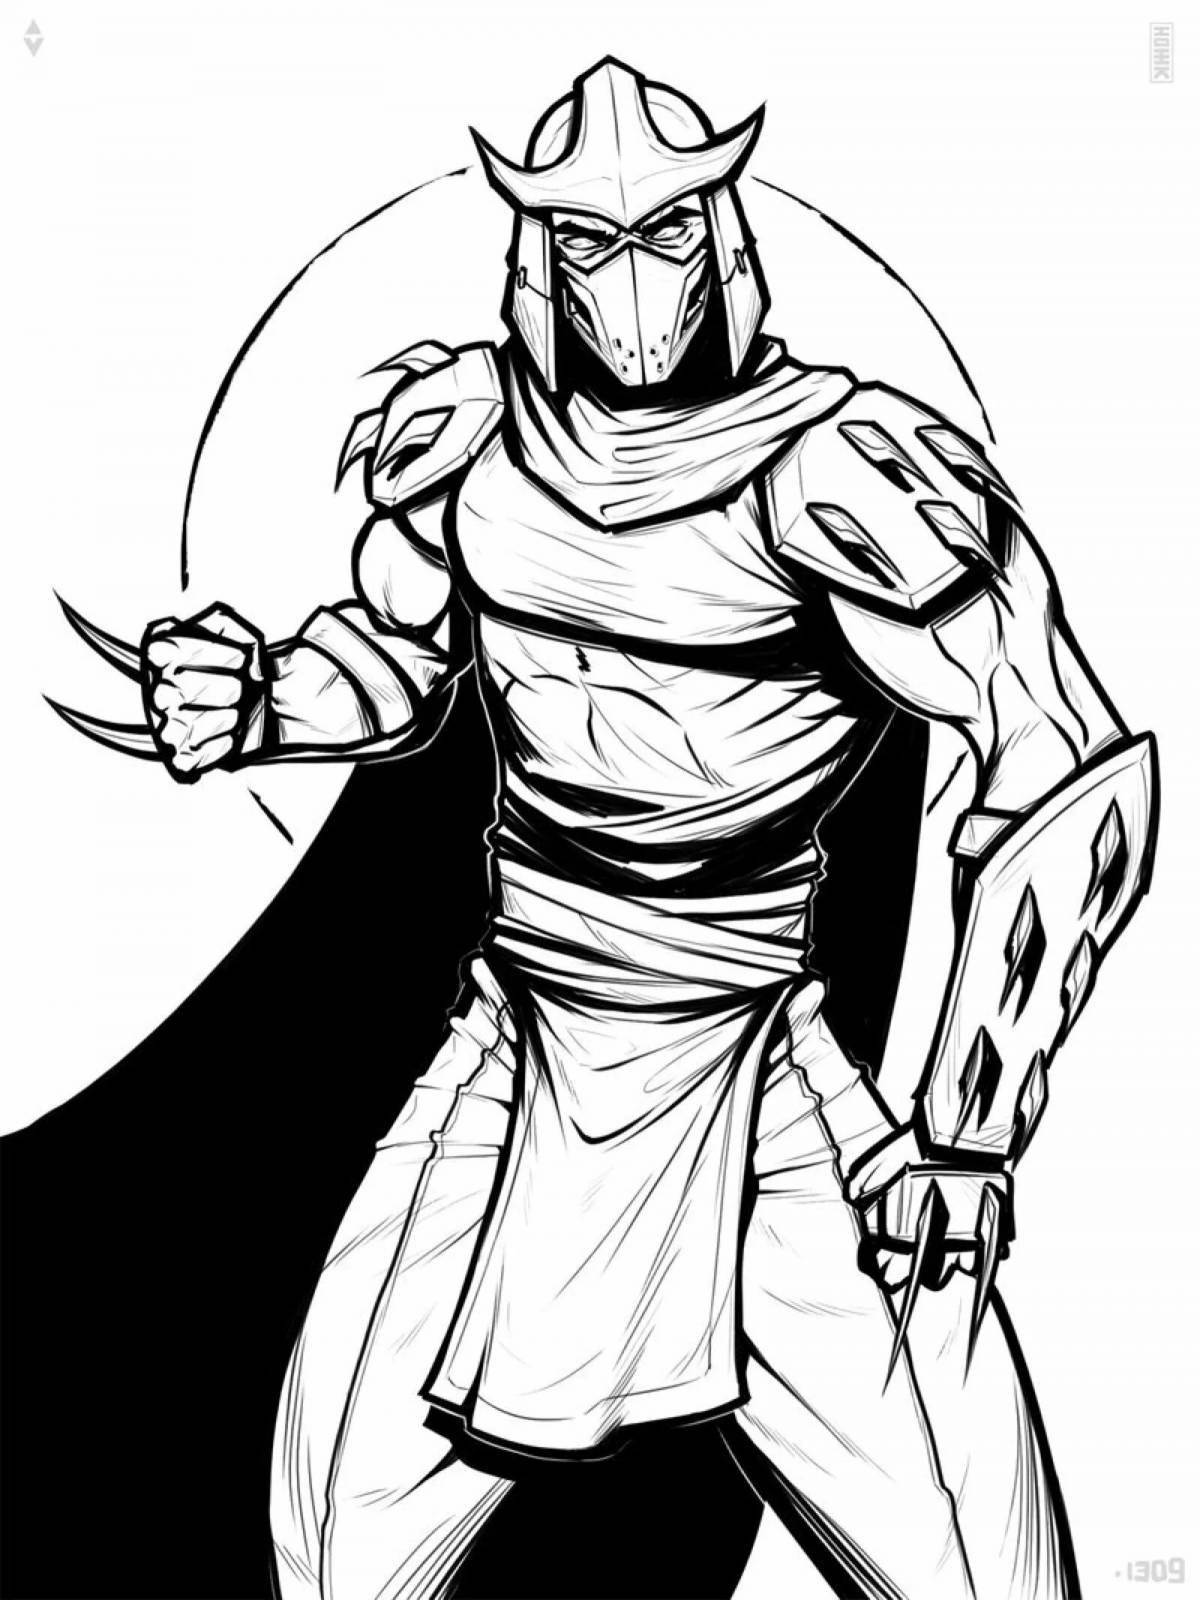 Amazing super shredder coloring page